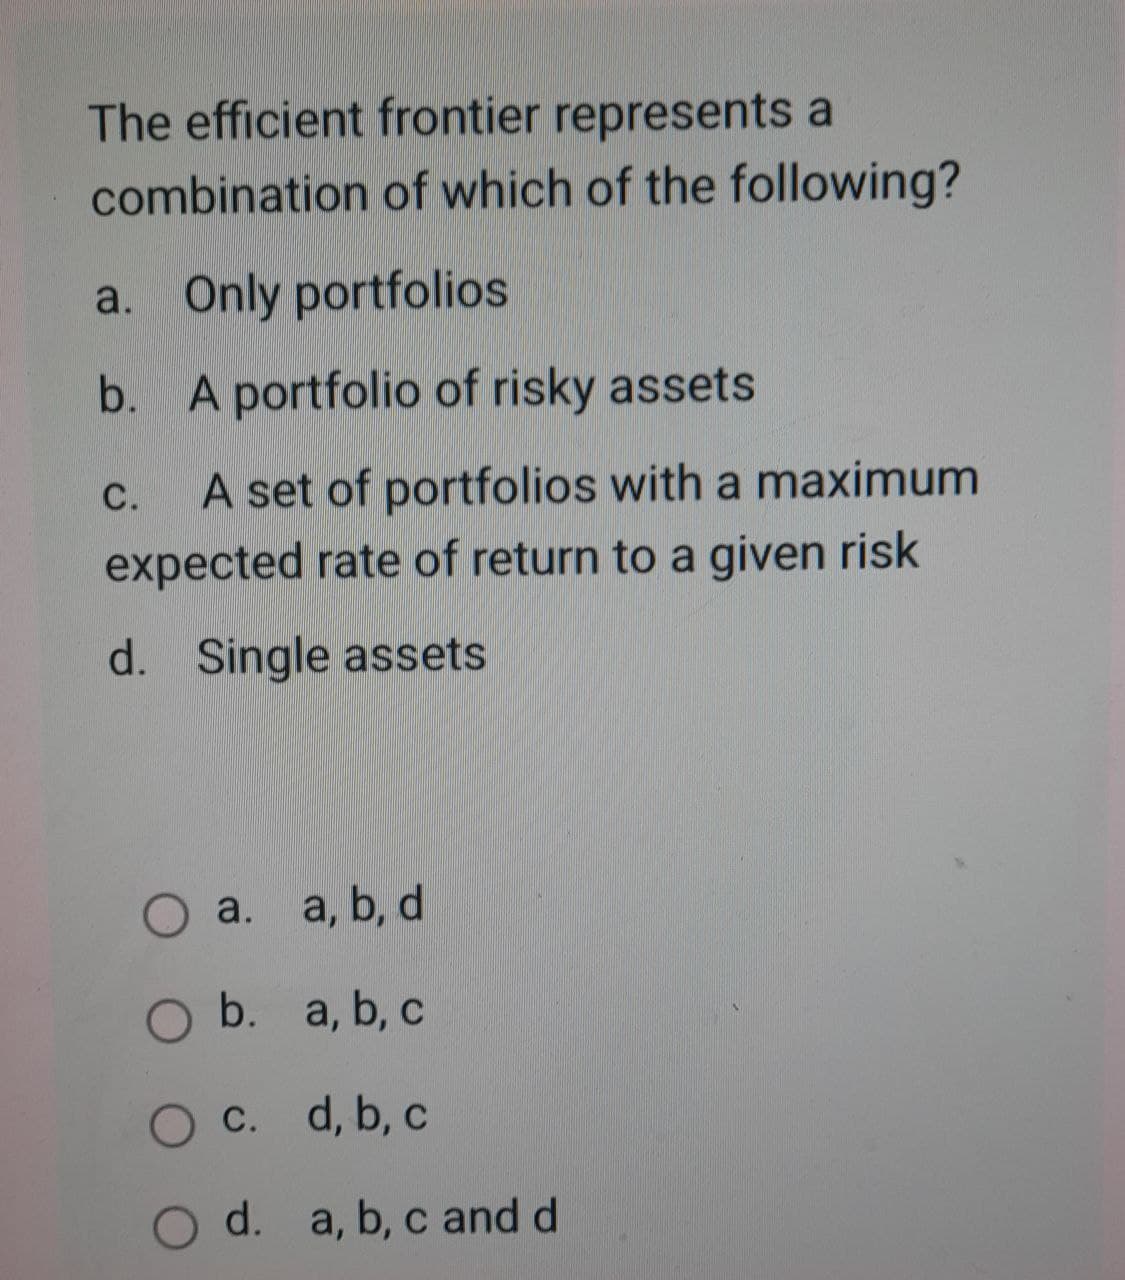 The efficient frontier represents a
combination of which of the following?
a. Only portfolios
b. A portfolio of risky assets
C. A set of portfolios with a maximum
expected rate of return to a given risk
d. Single assets
○ a.
a. a, b, d
O b. a, b, c.
O c. d, b, c
O d. a, b, c and d